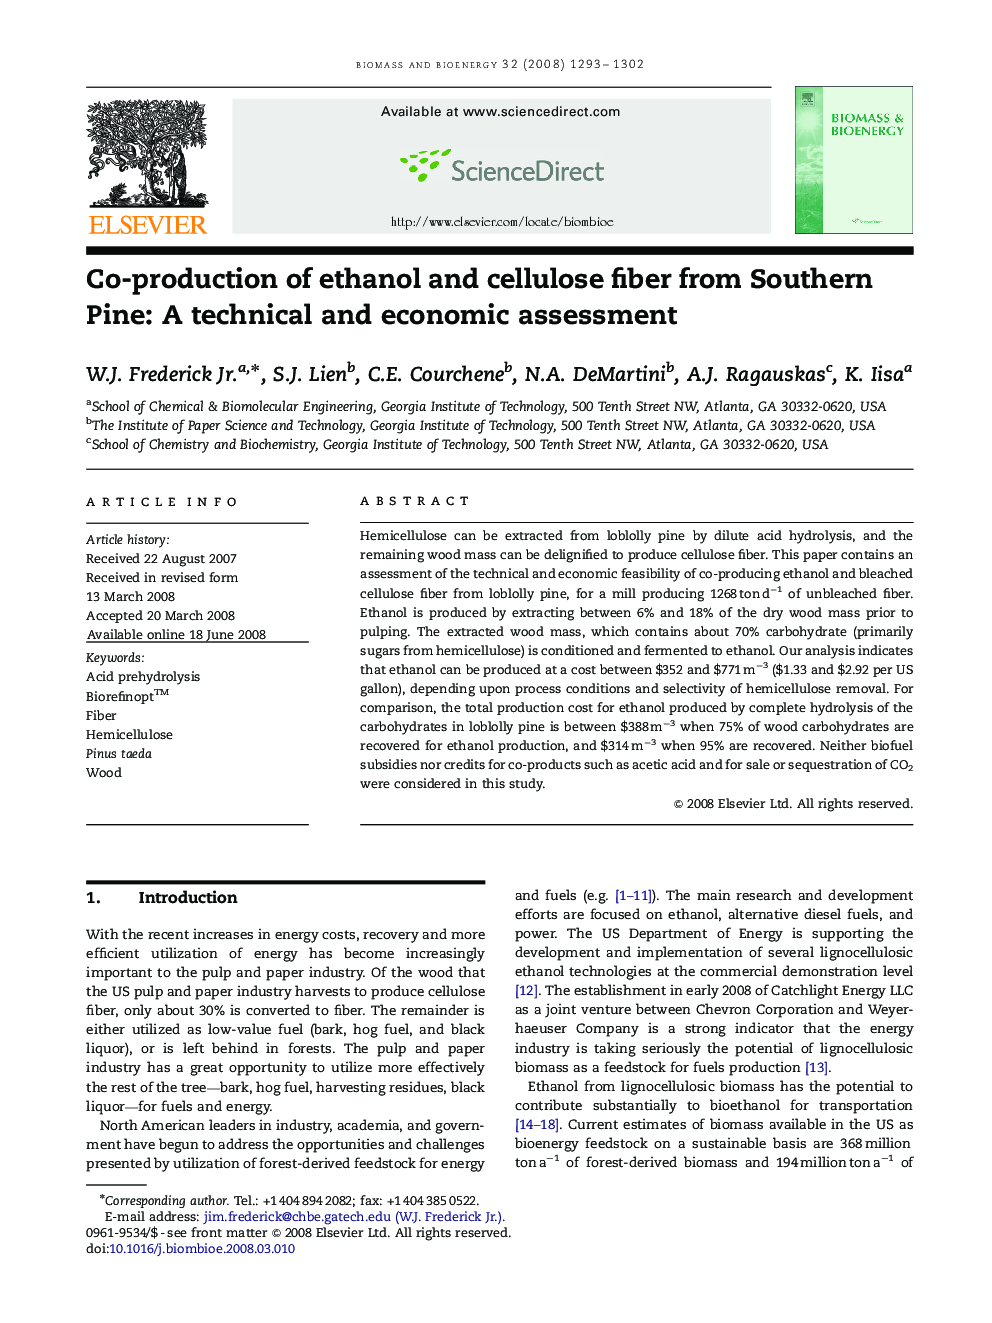 Co-production of ethanol and cellulose fiber from Southern Pine: A technical and economic assessment